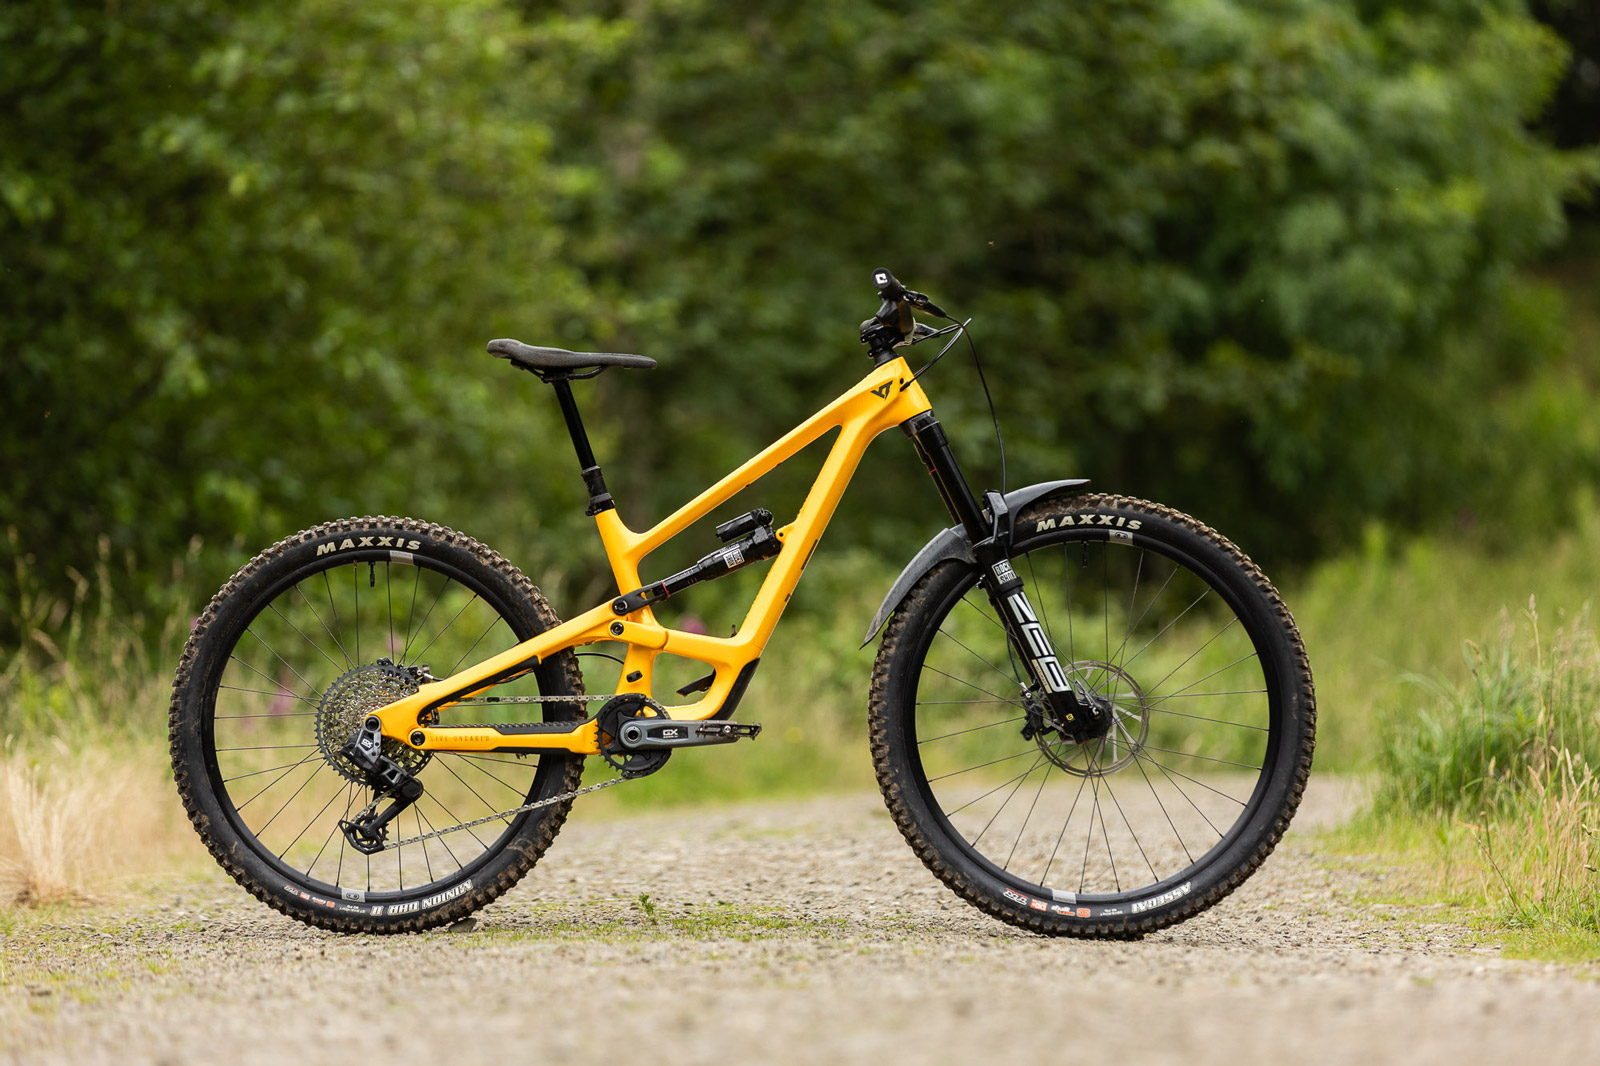 yt capra mx review 170mm travel mullet reasonably priced carbon